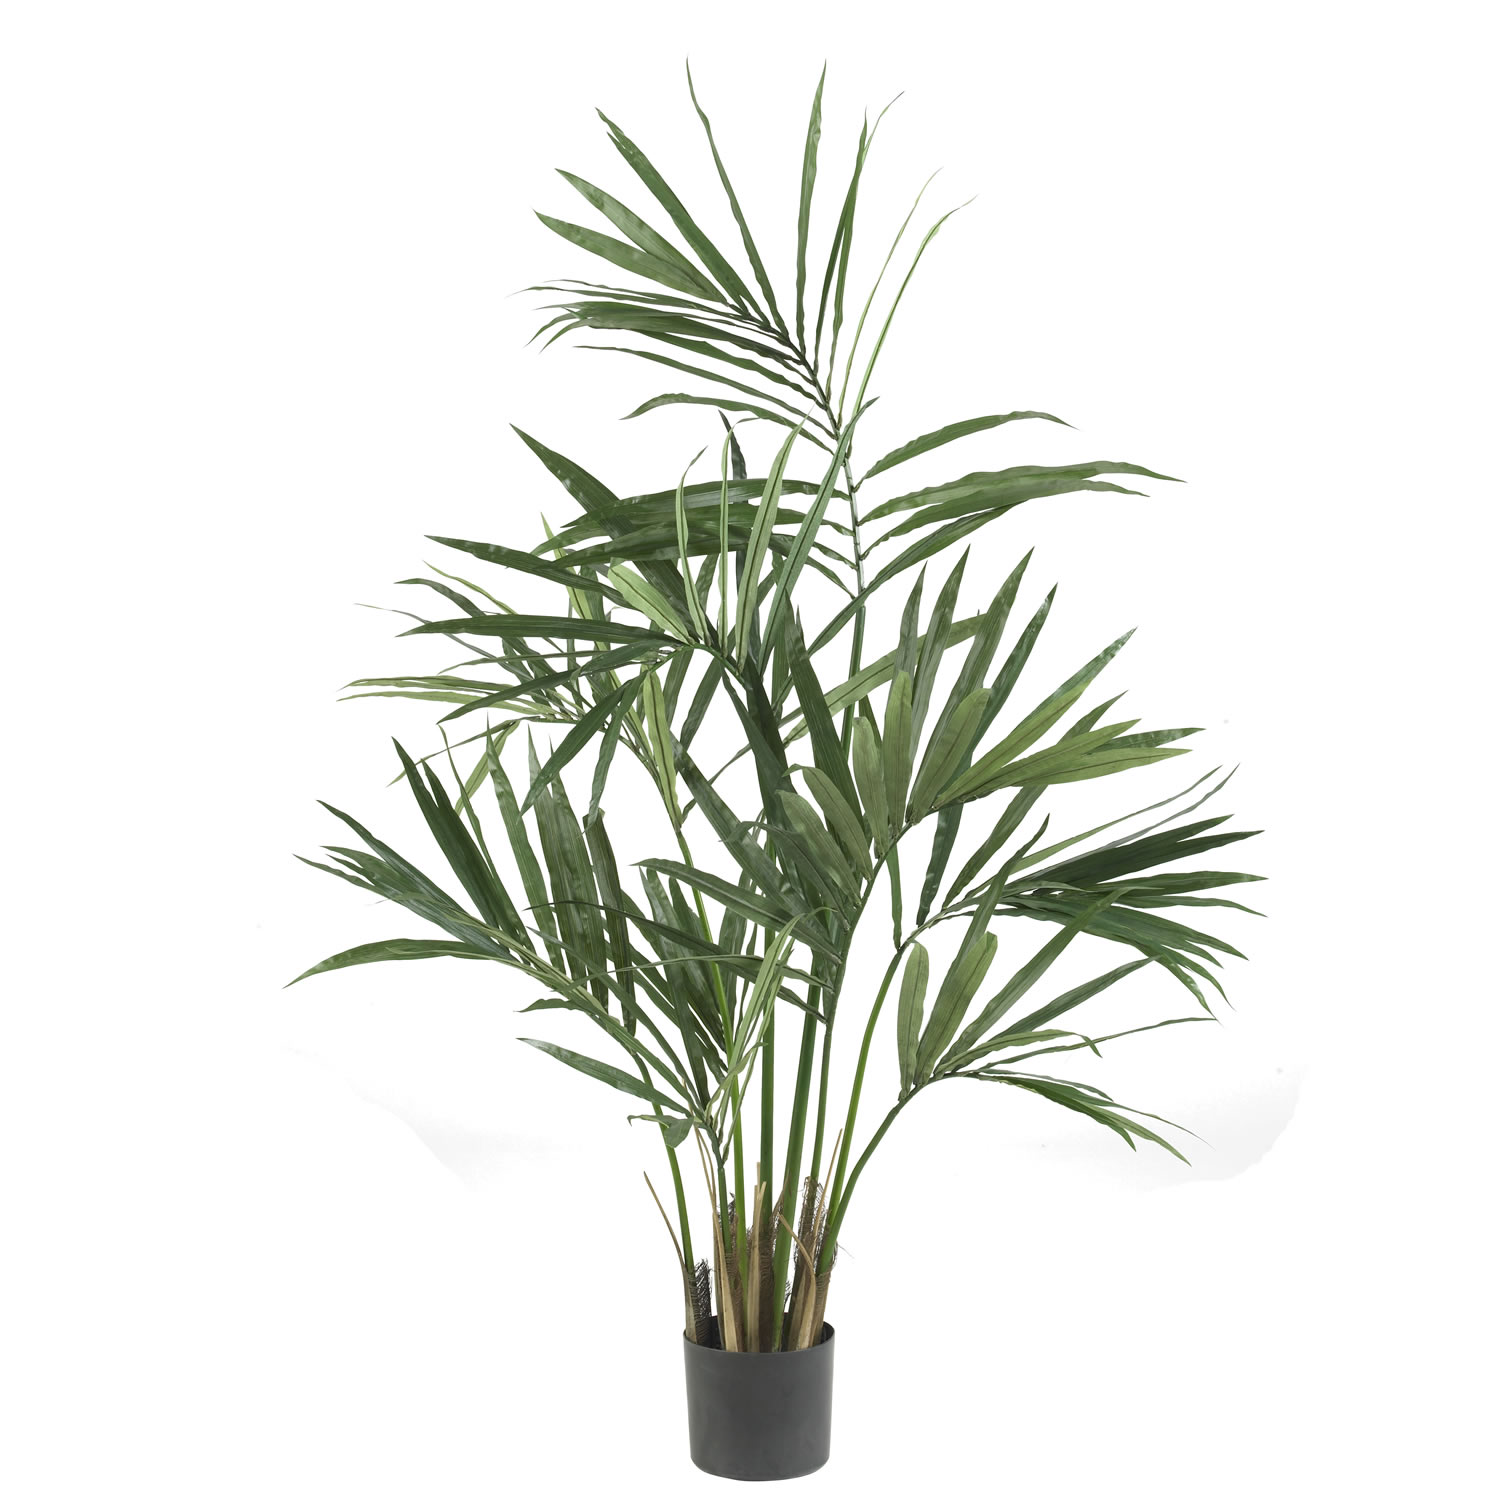 5 Foot Kentia Palm Tree: Potted